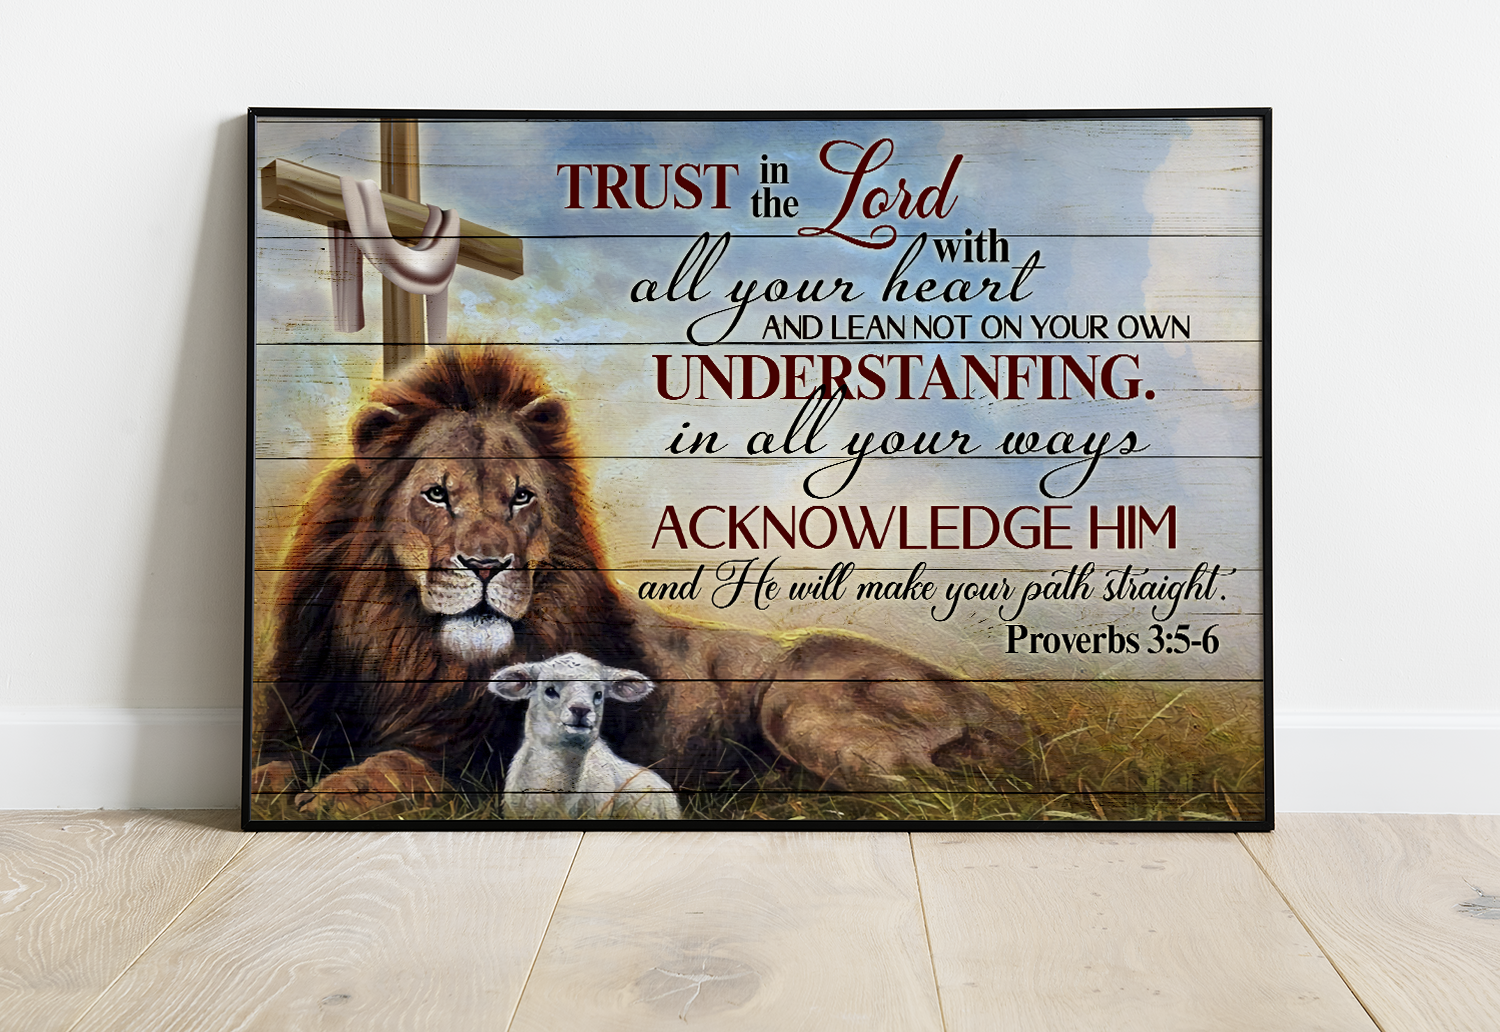 Poster Jesus Lion And Lamb Proverbs 3:5-6 Trust In The Lord With All Your Heart Christian